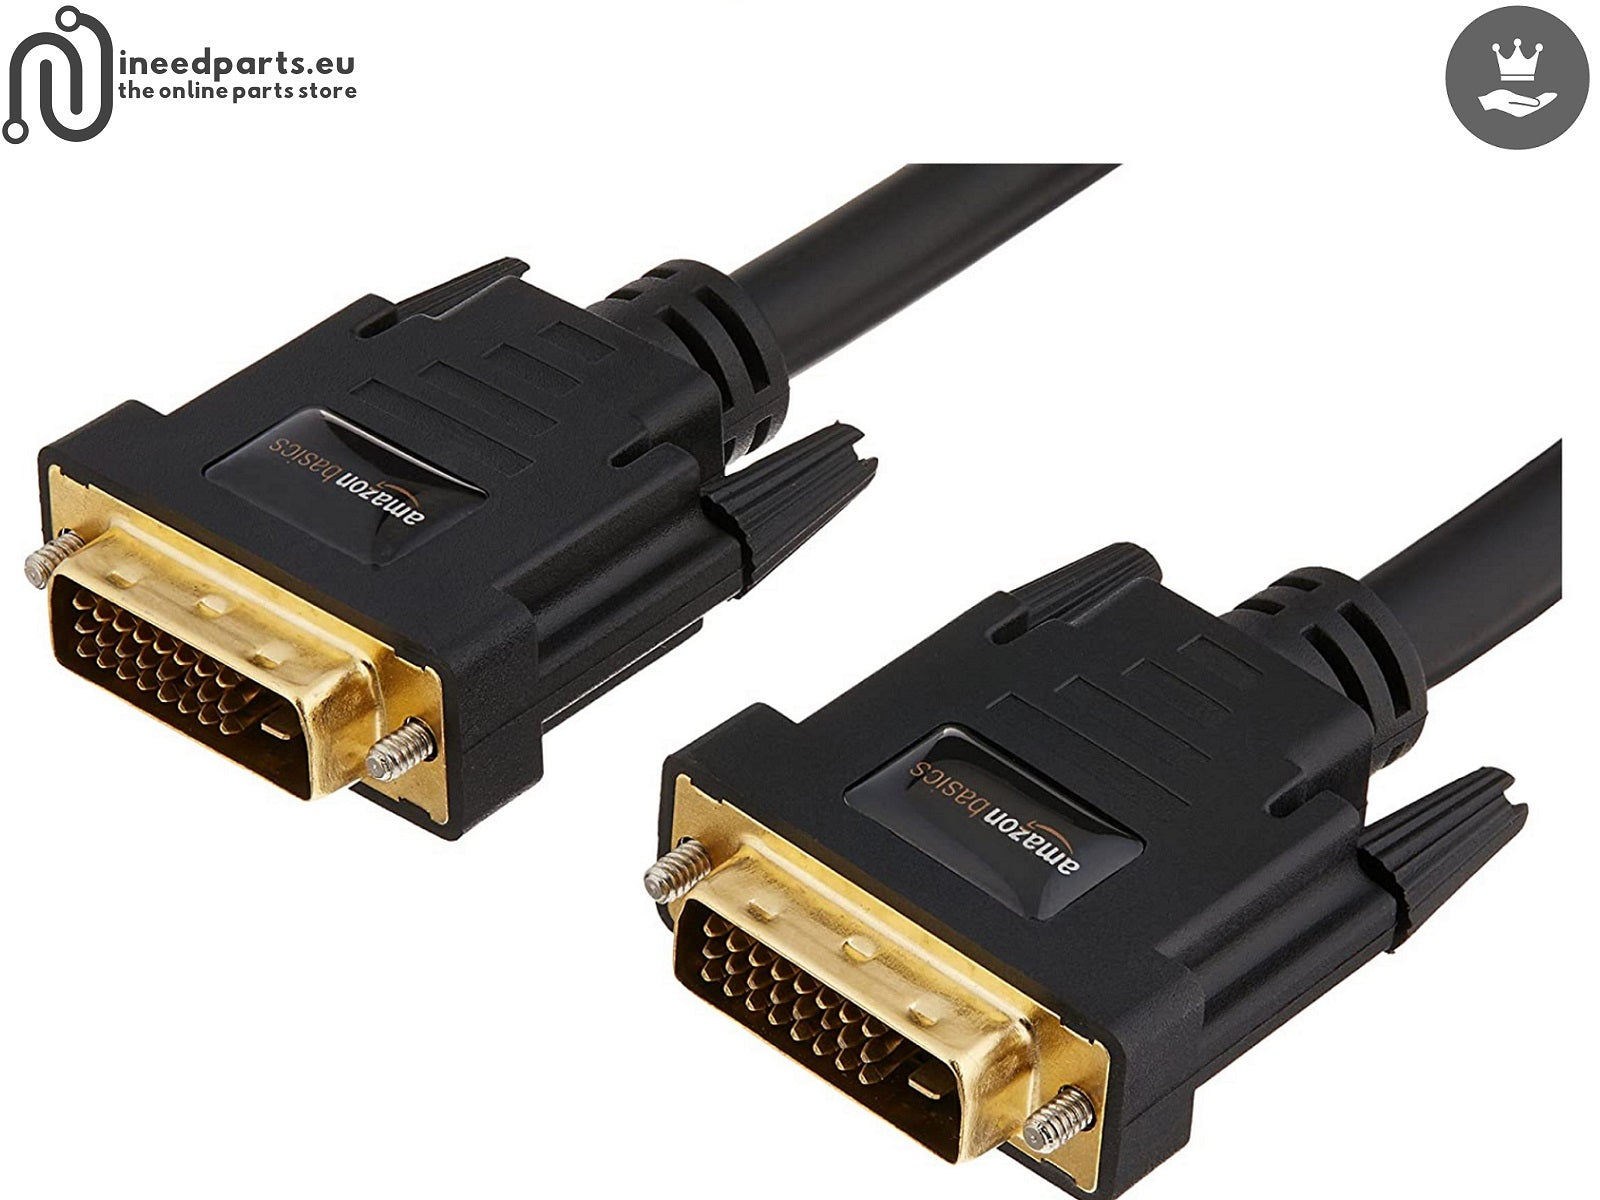 DVI to DVI cable 24+1 Gold Plated with Ferites 0.9 meters